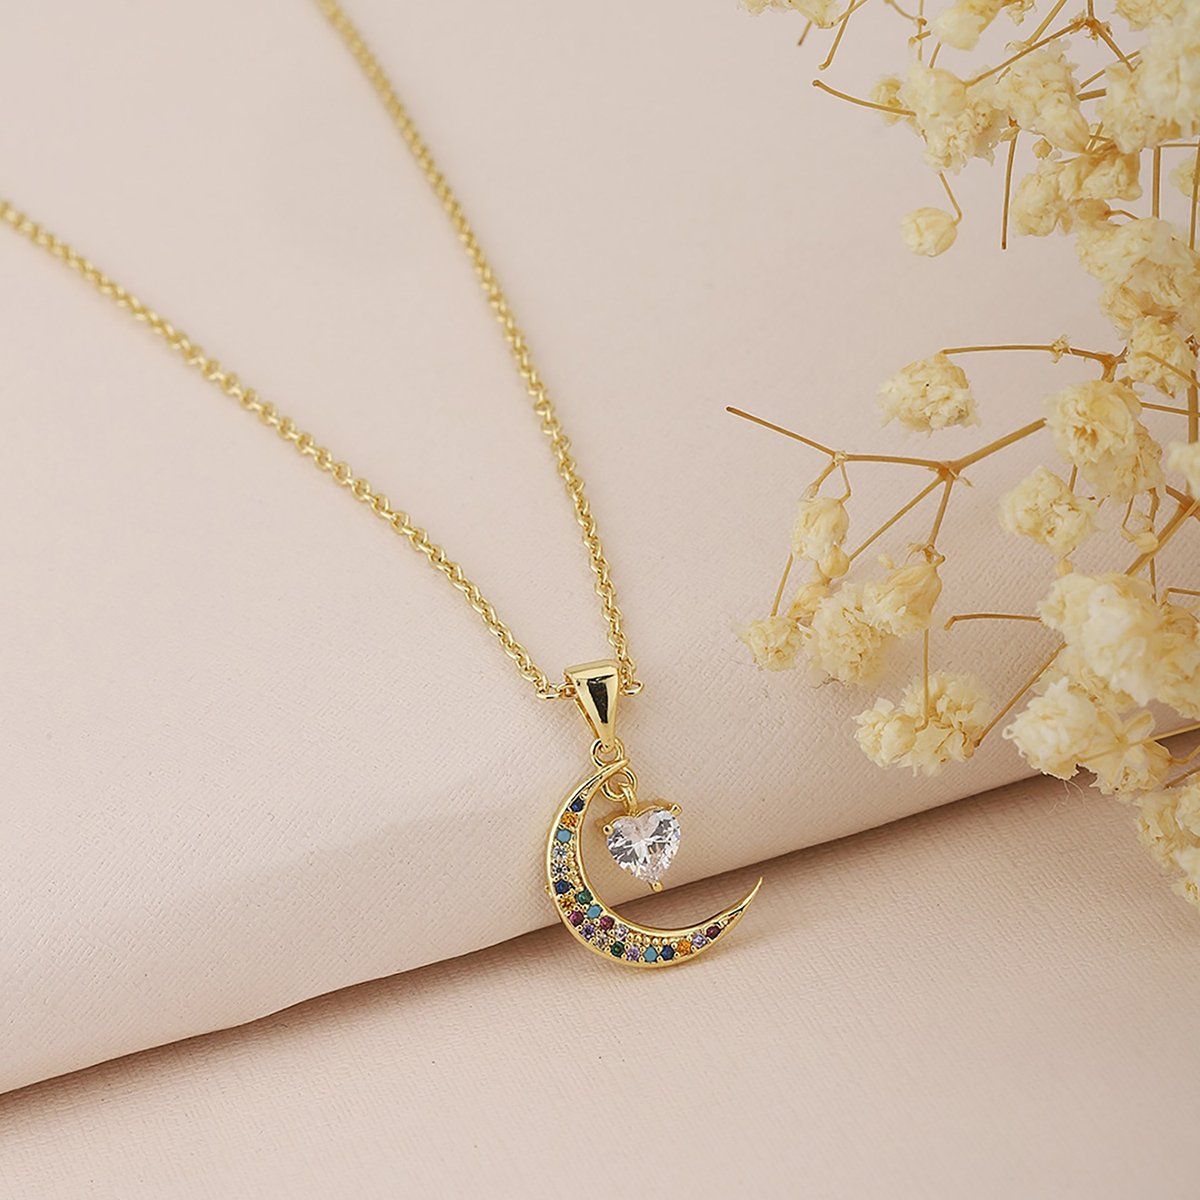 MoMuse | 9kt Gold Moon & Star Necklace